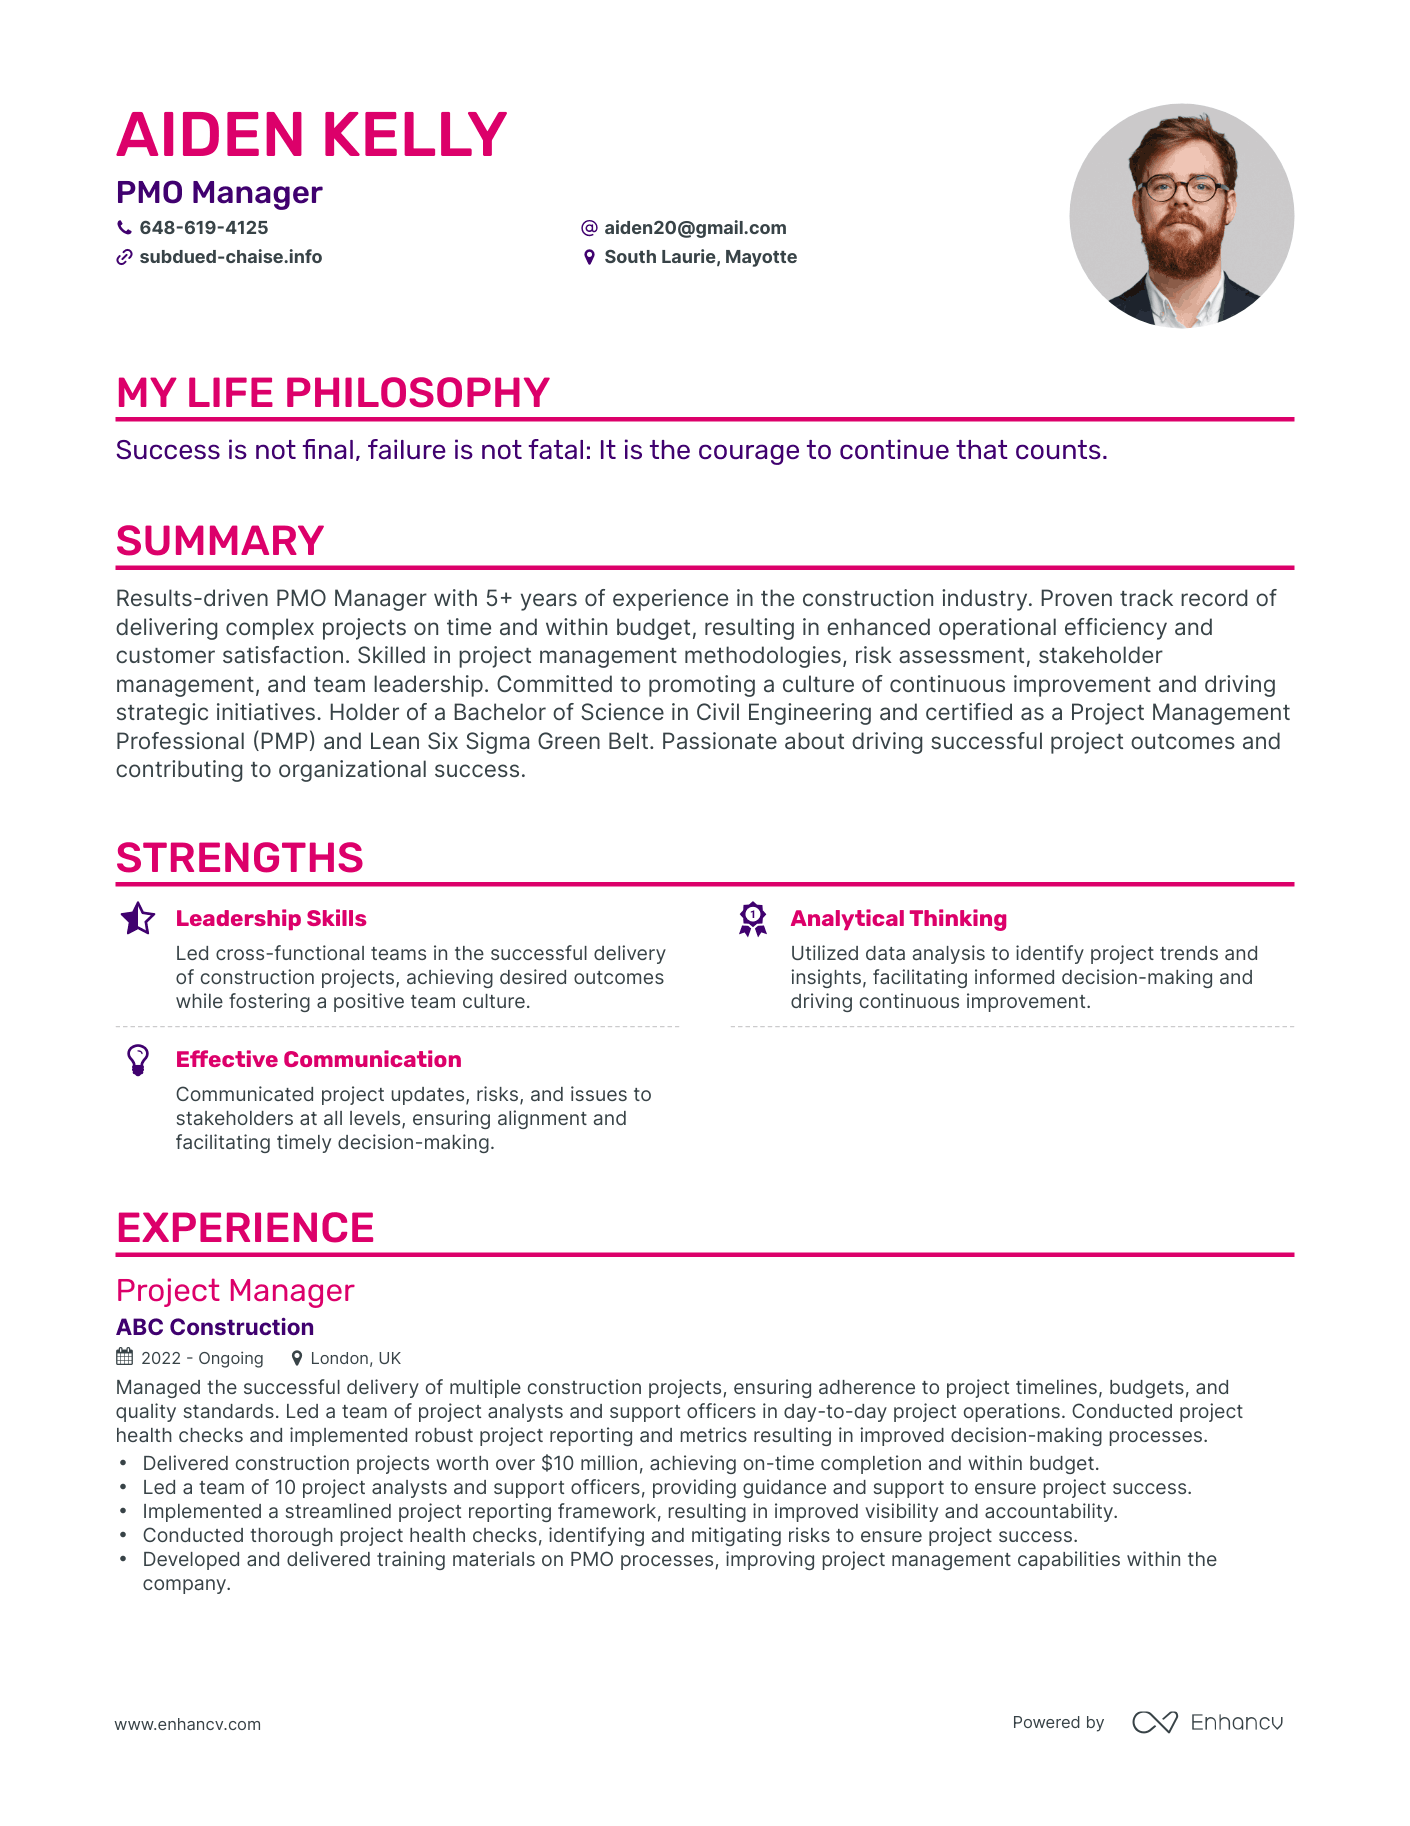 Creative PMO Manager Resume Example